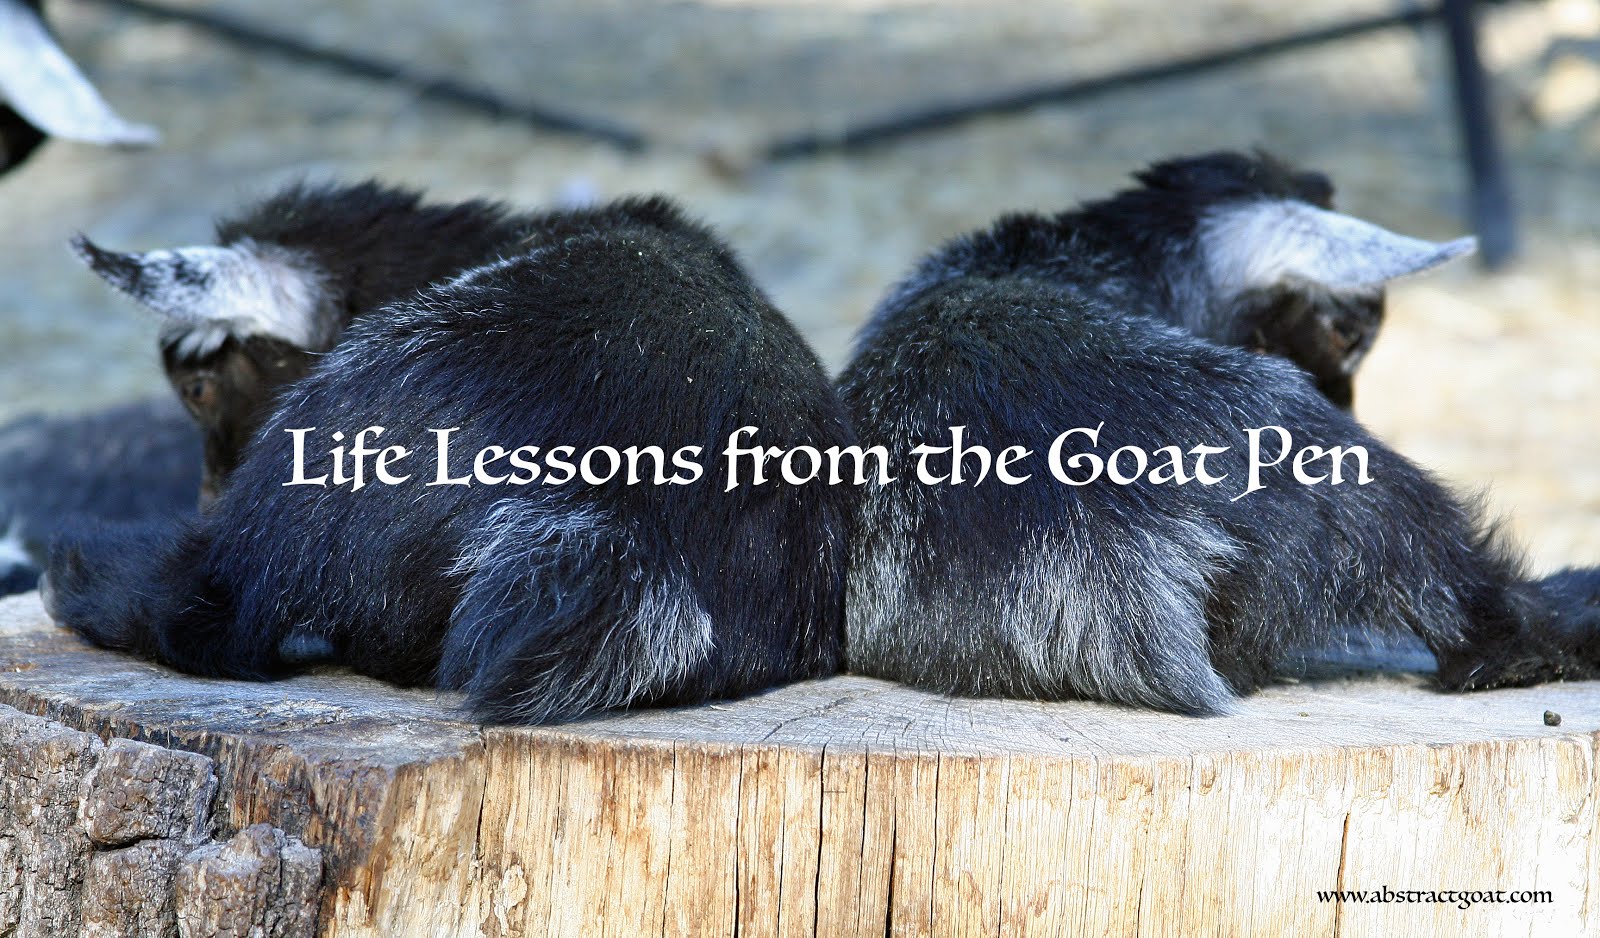 Life Lessons from the Goat Pen